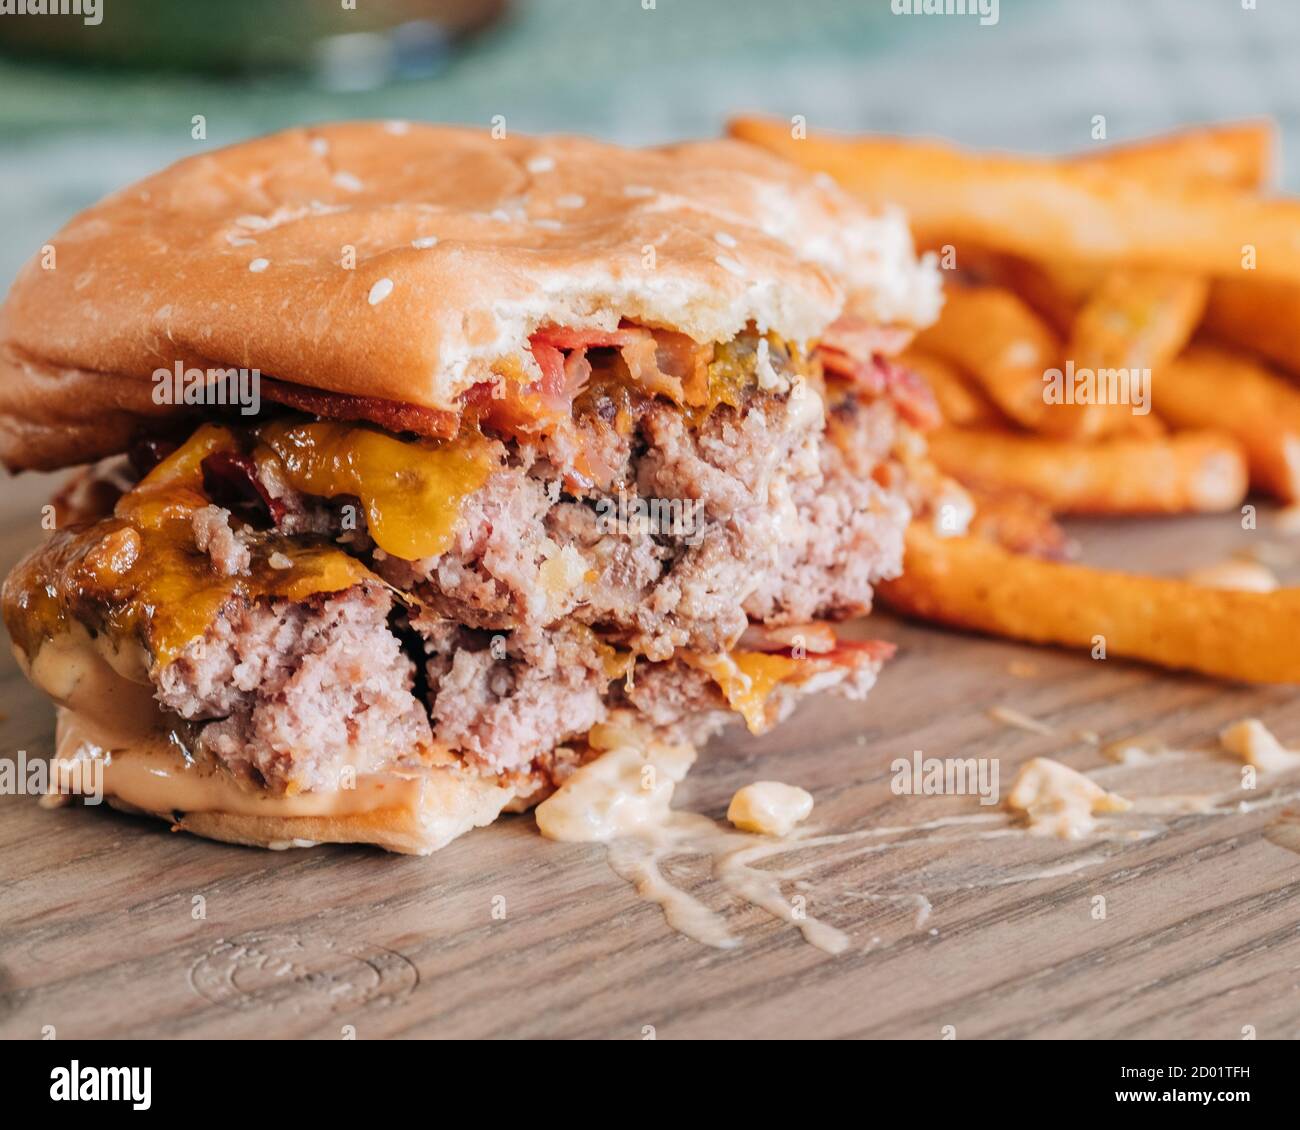 Half eaten bacon cheeseburger with french fries on wooden plate Stock Photo